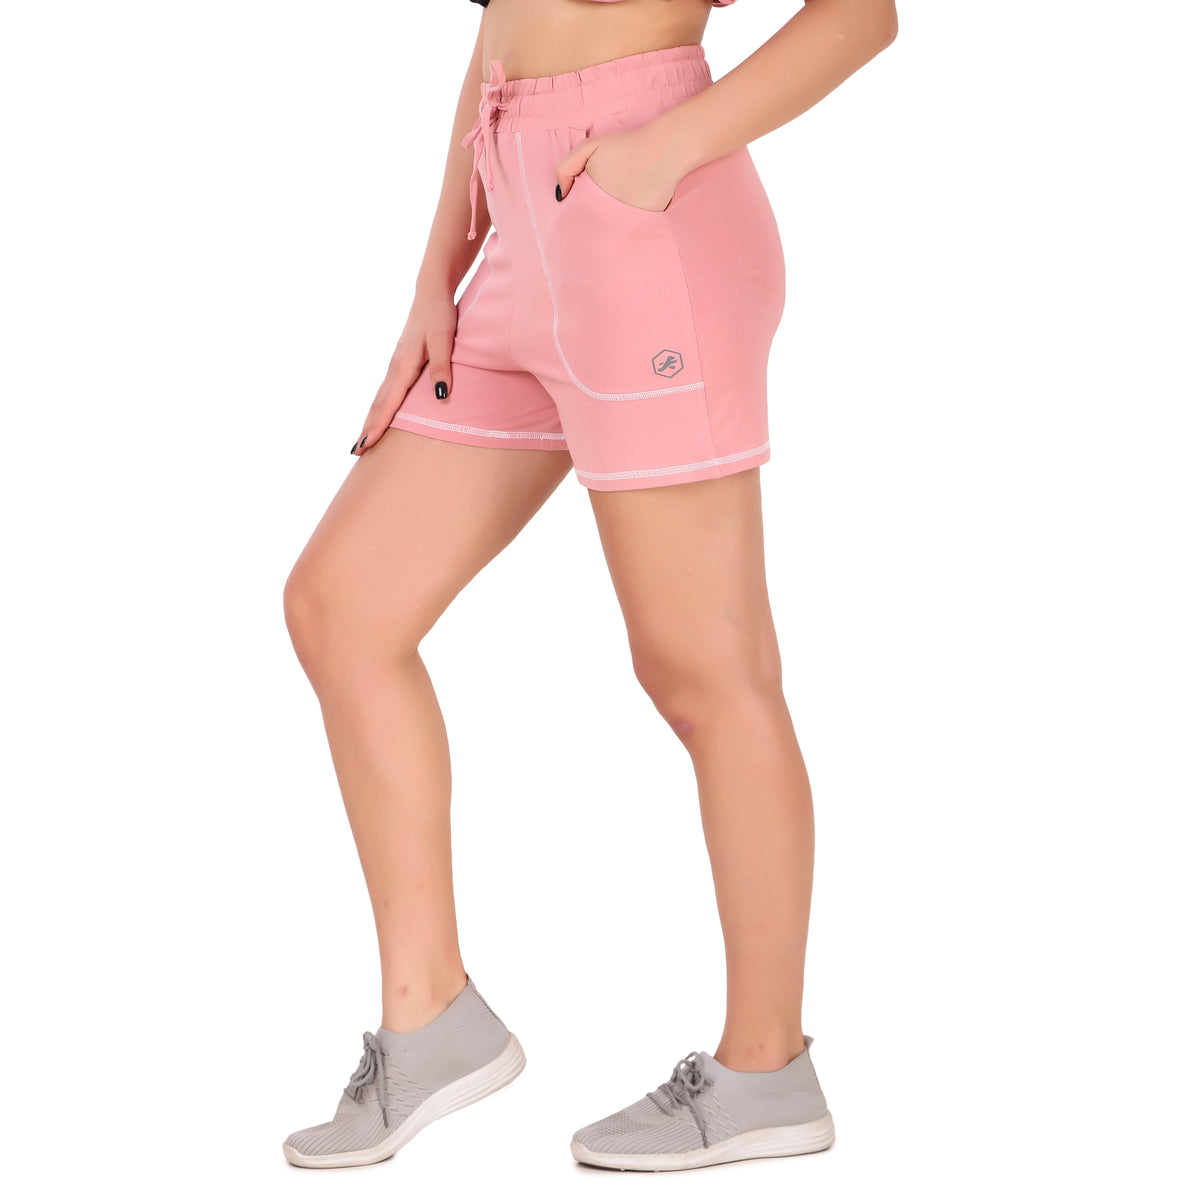 Cotton Lounge Shorts For Women (Pink)